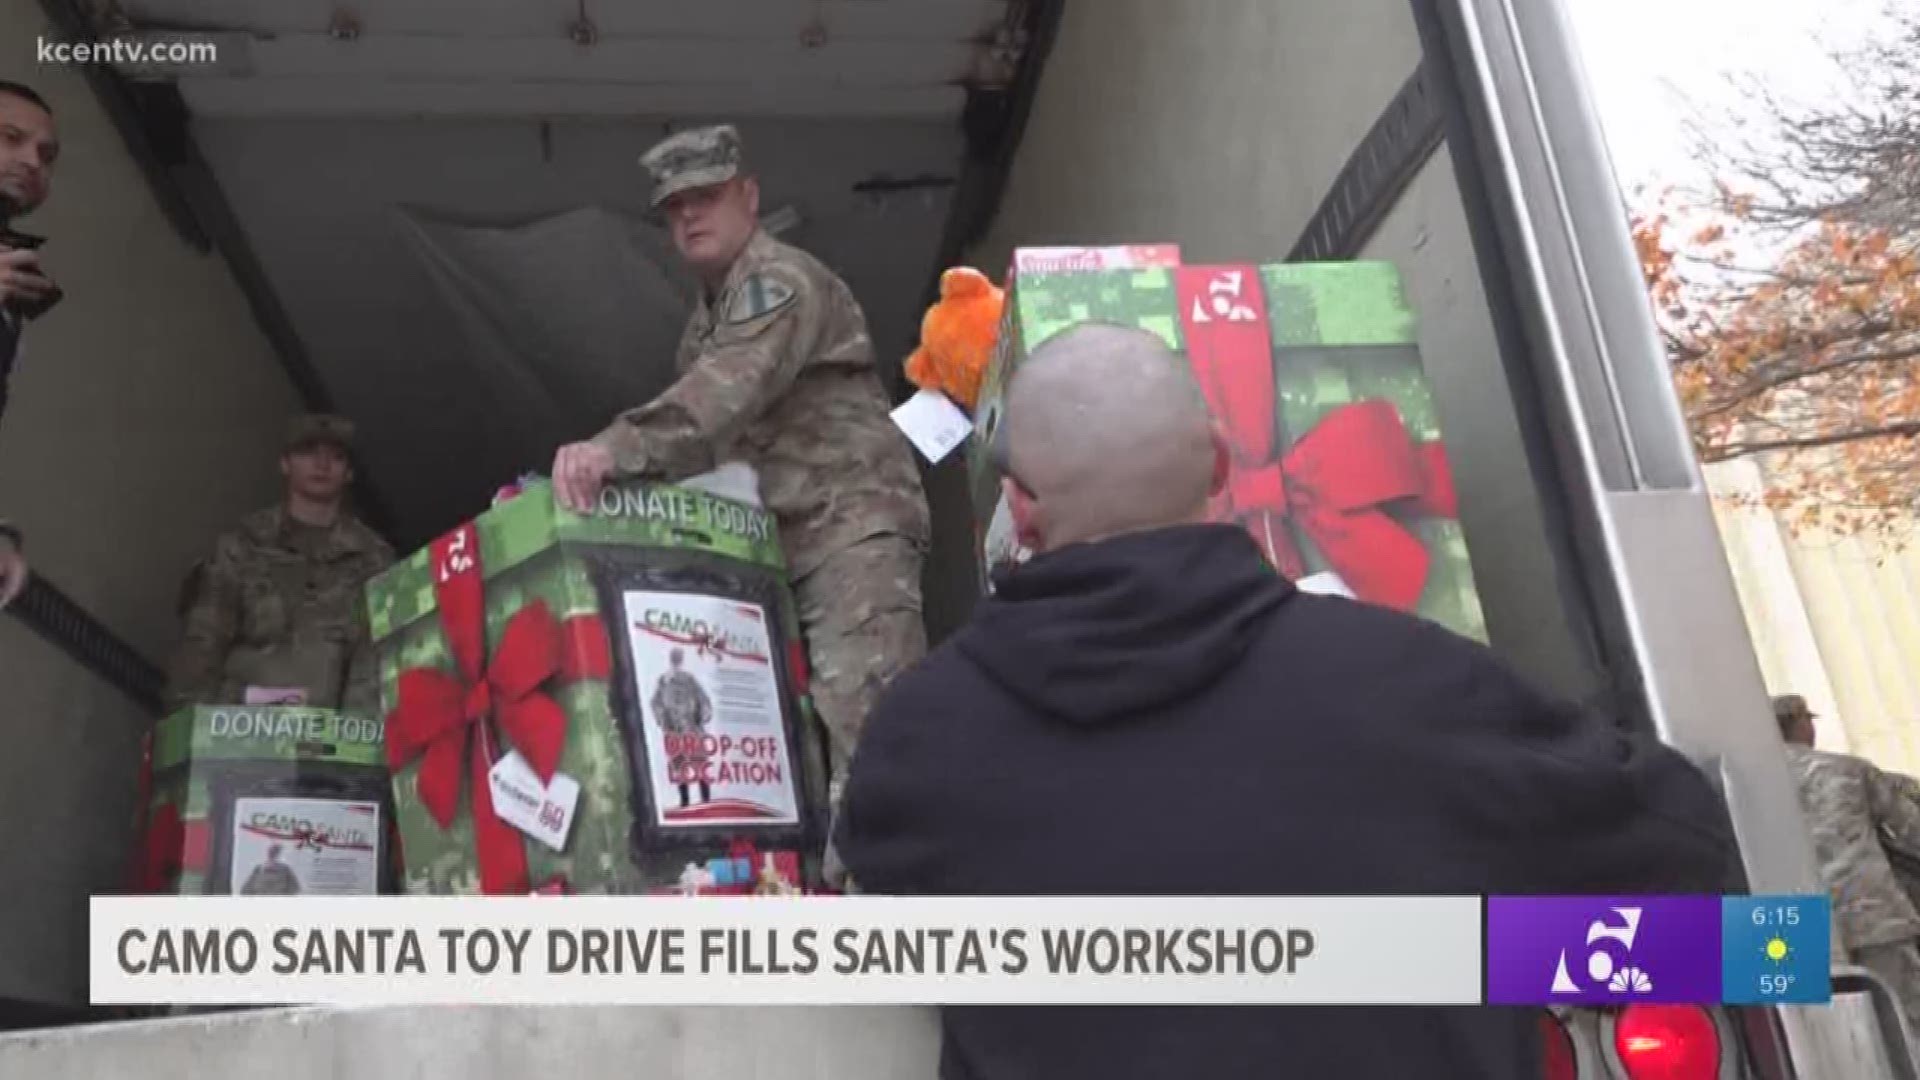 The H-E-B, KCEN Channel 6 Camo Santa toy drive collected hundreds of toys for the children of the men and women who sacrifice their lives for our freedoms.